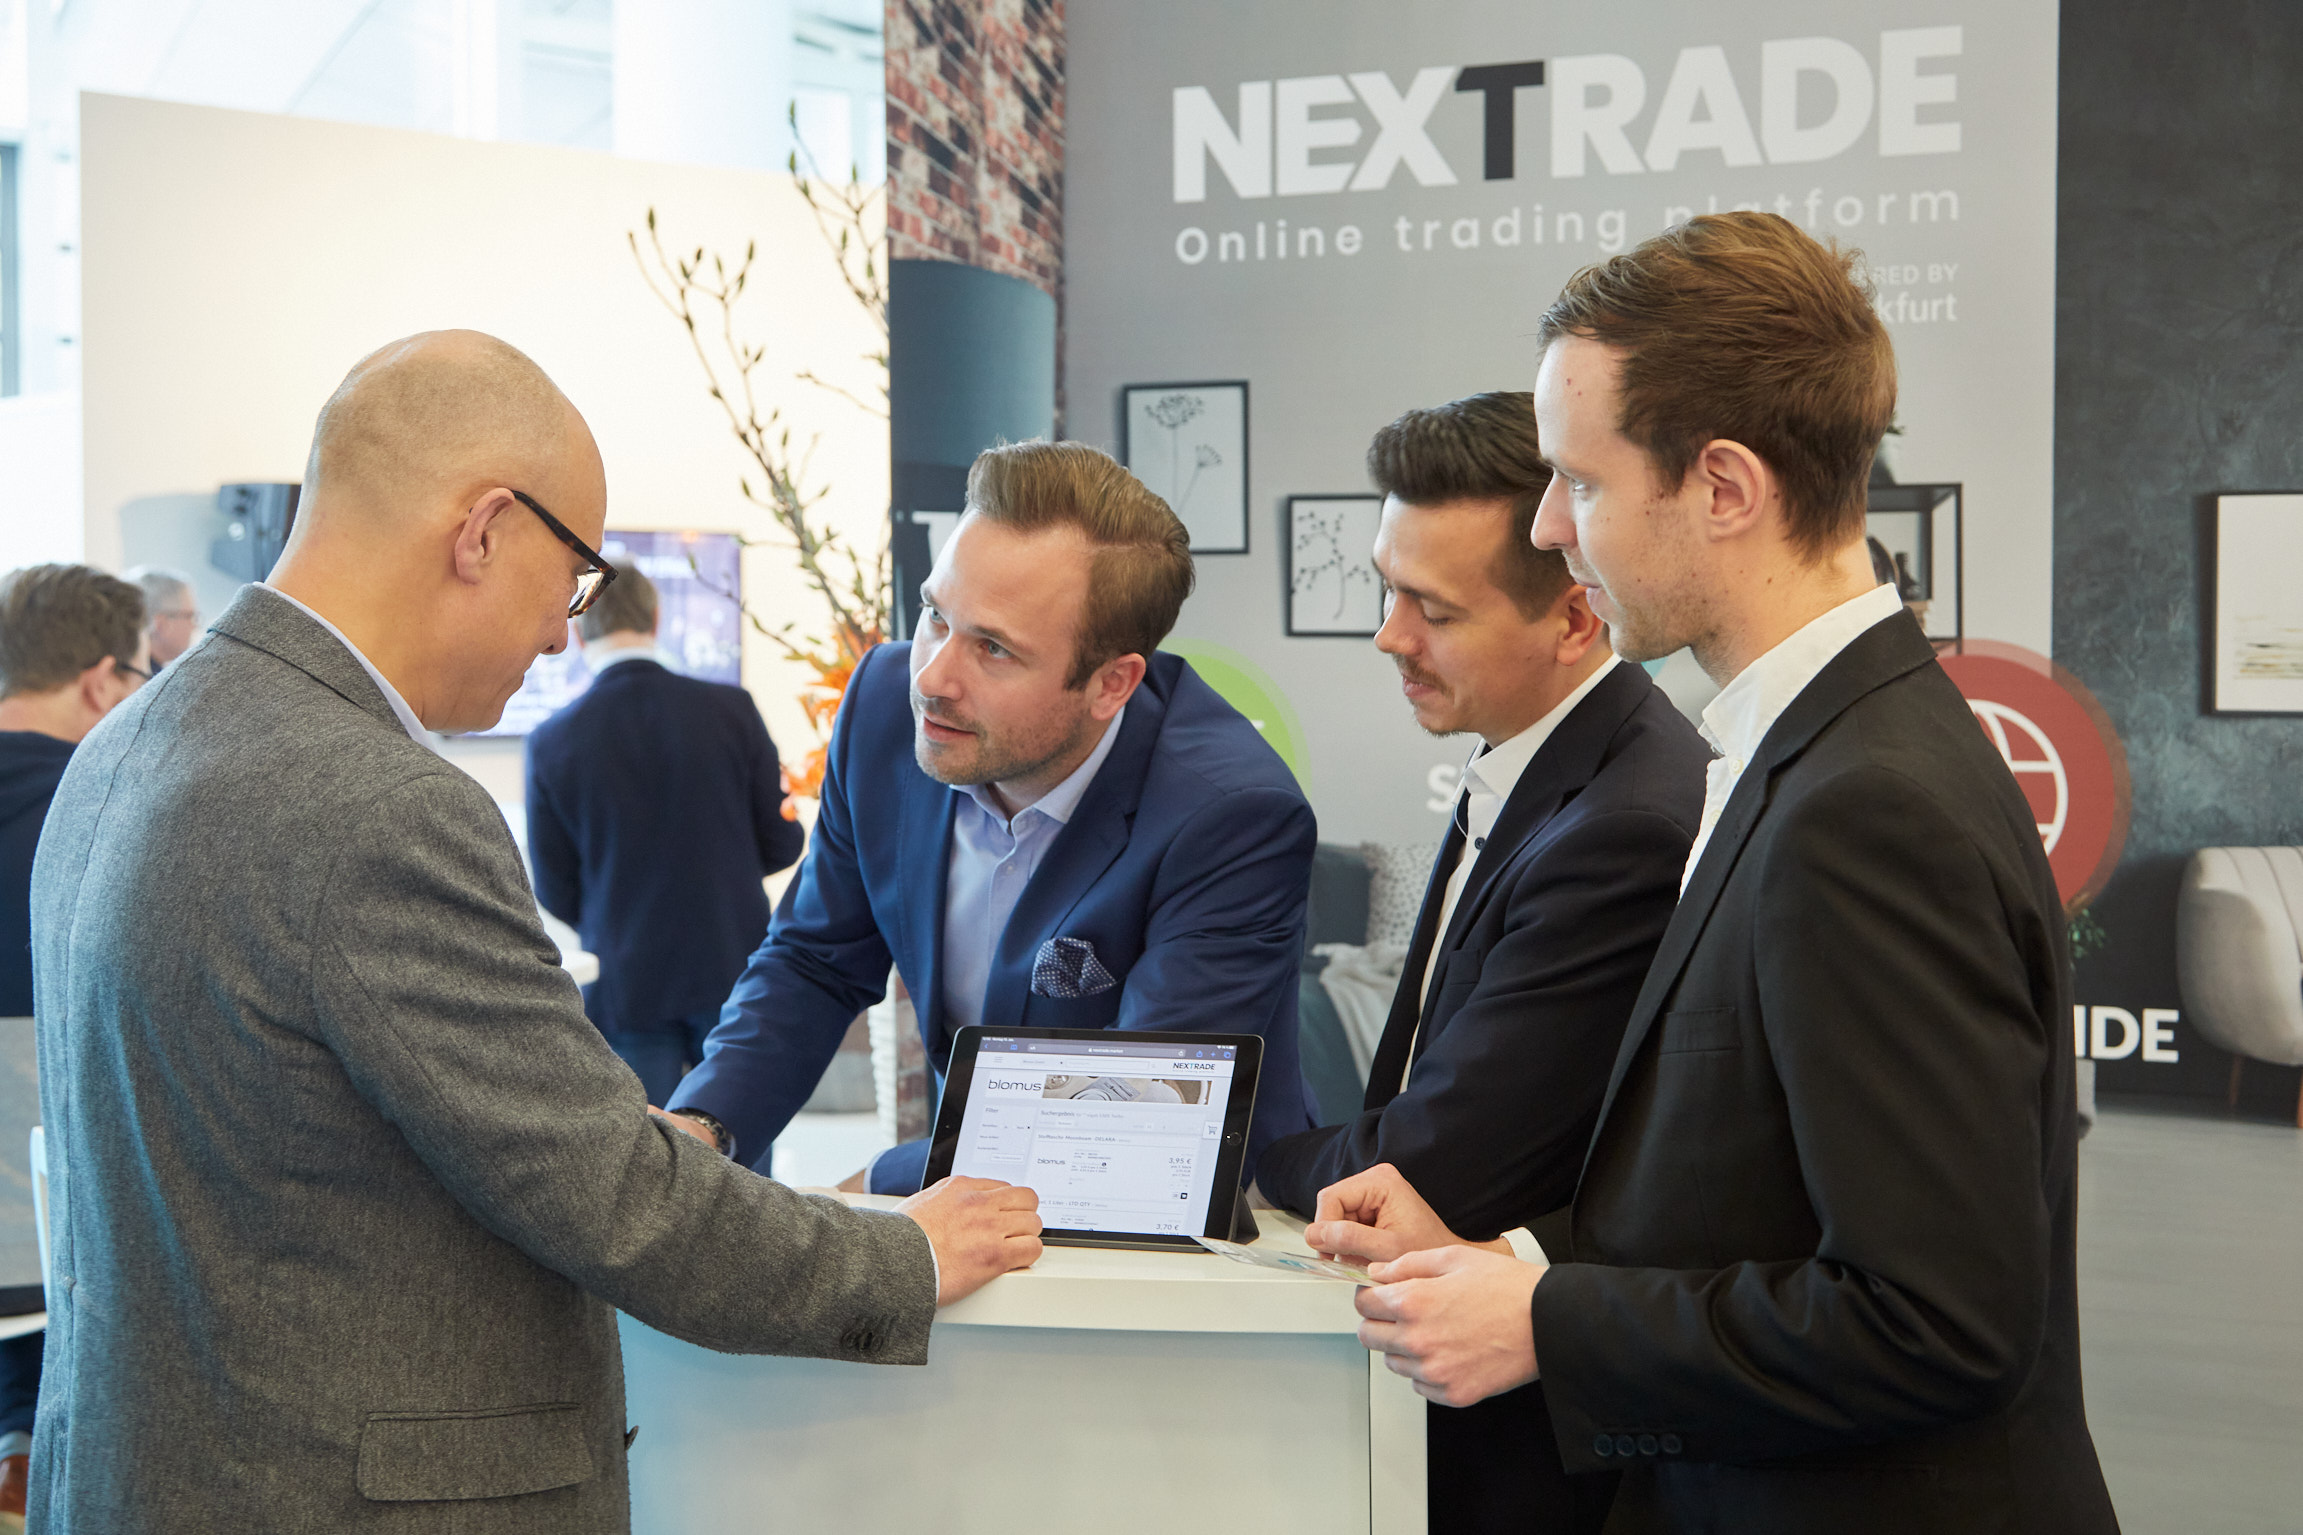 Ambiente 2020: Conversation at the Nextrade info stand with Nicolaus Gedat (left) and Philipp Ferger